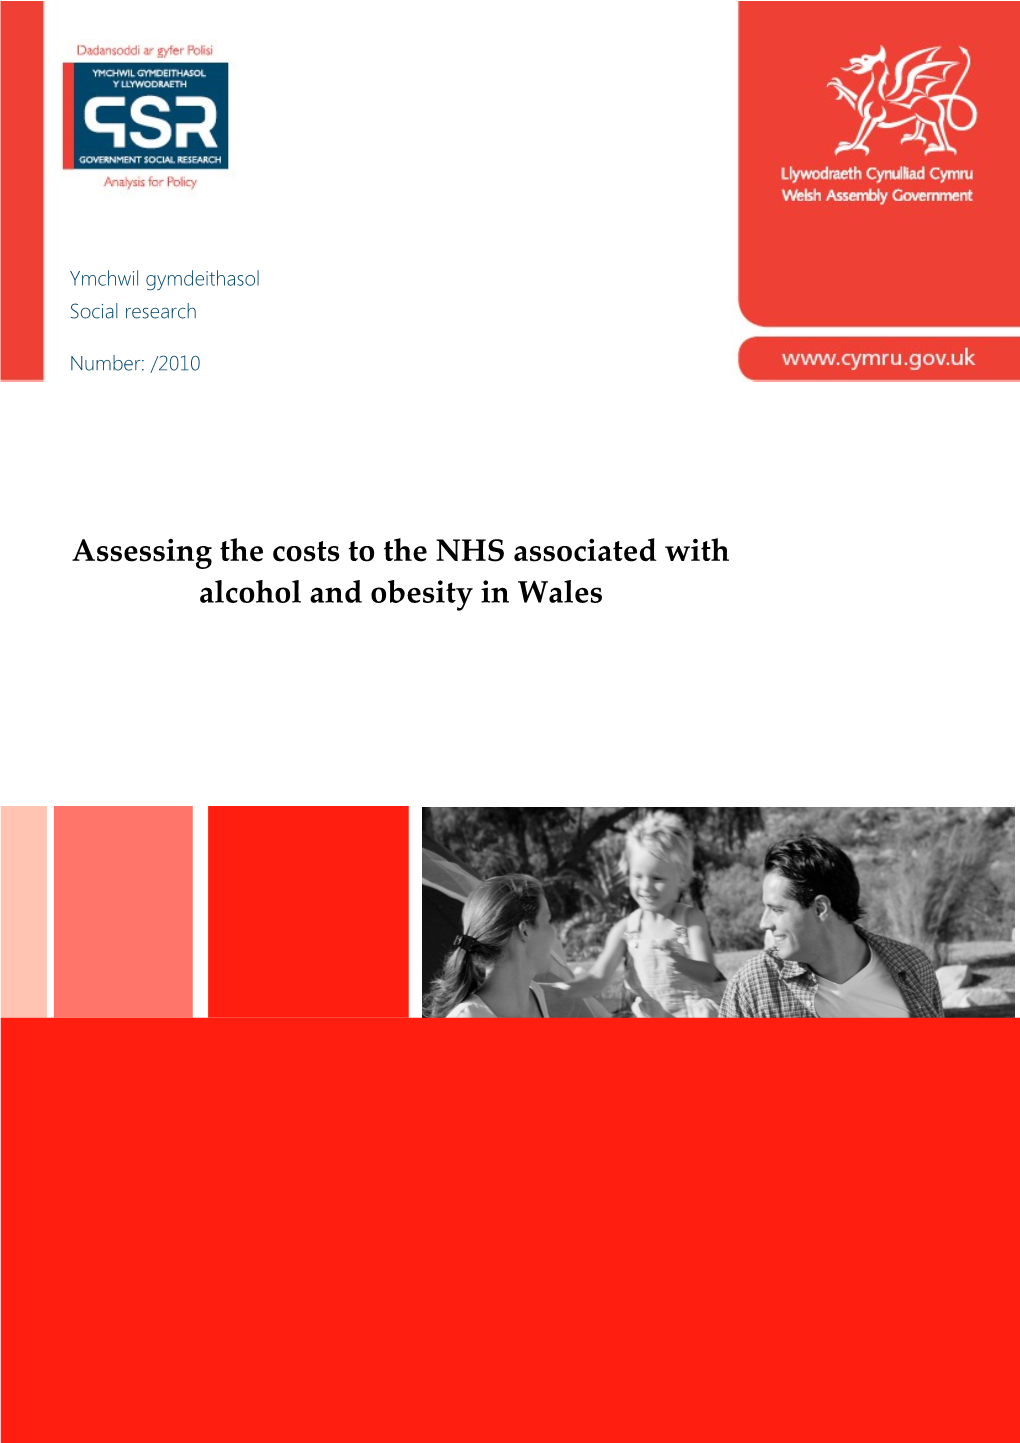 Assessing the Costs to the NHS Associated with Alcohol and Obesity in Wales